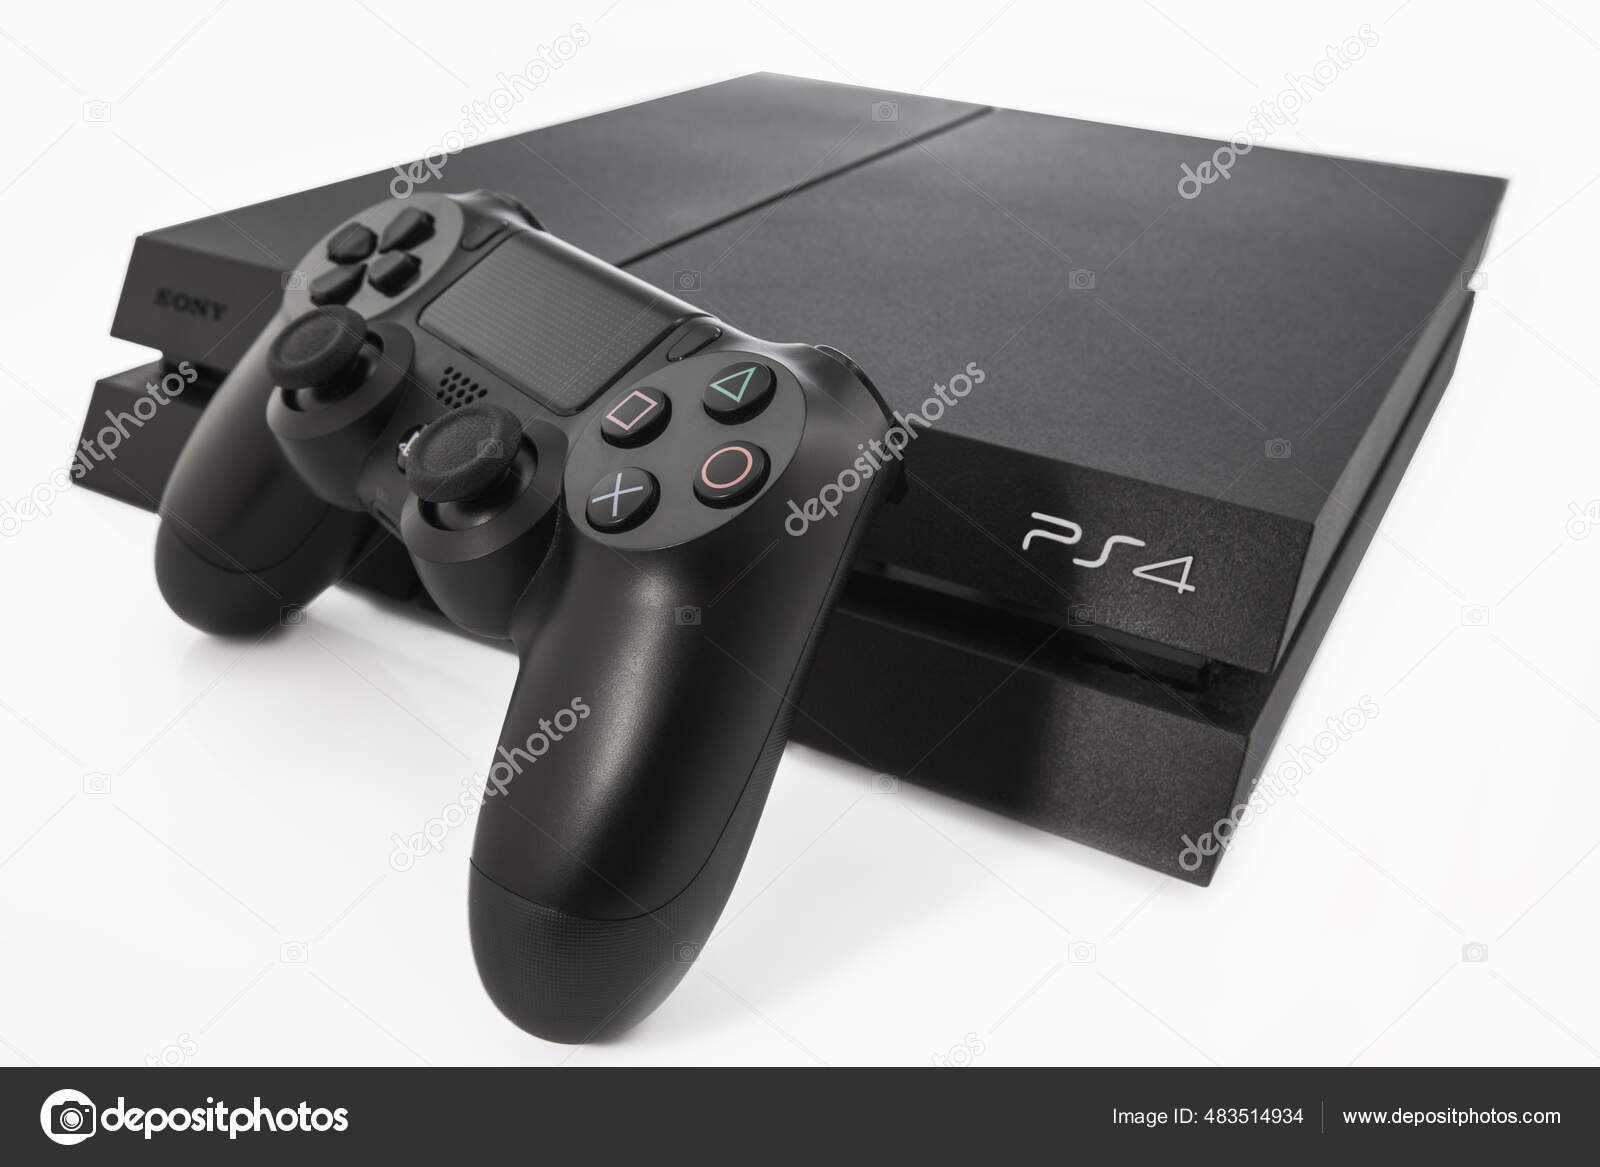 Ps isolated Photos, Royalty Free Ps controller isolated | Depositphotos